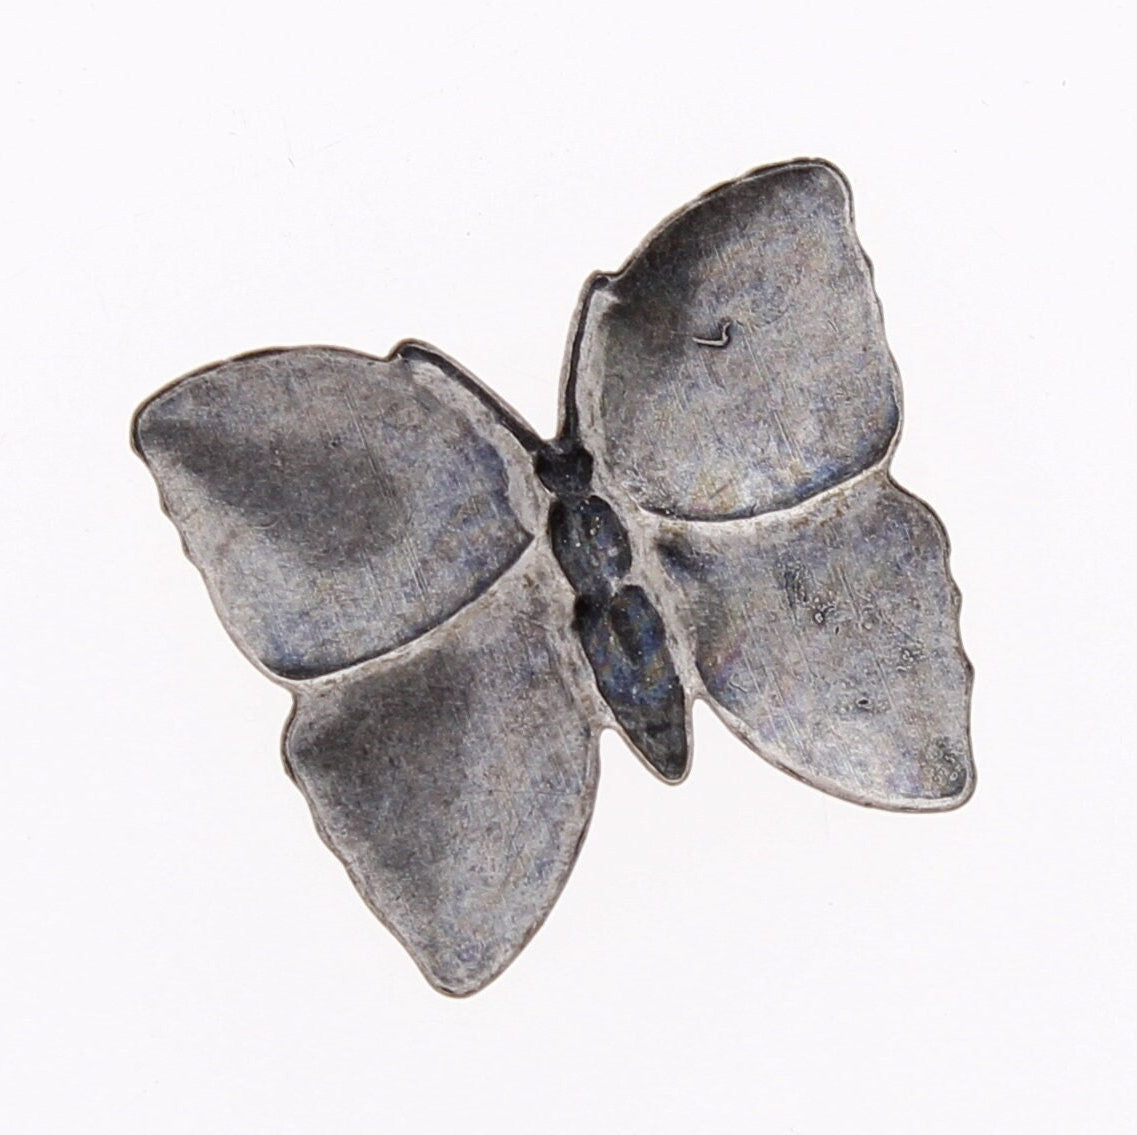 24mm Polka dot Butterfly Stamping Charm, Antique Silver, Antique Gold or Bright Silver, Made in USA, Pack of 6